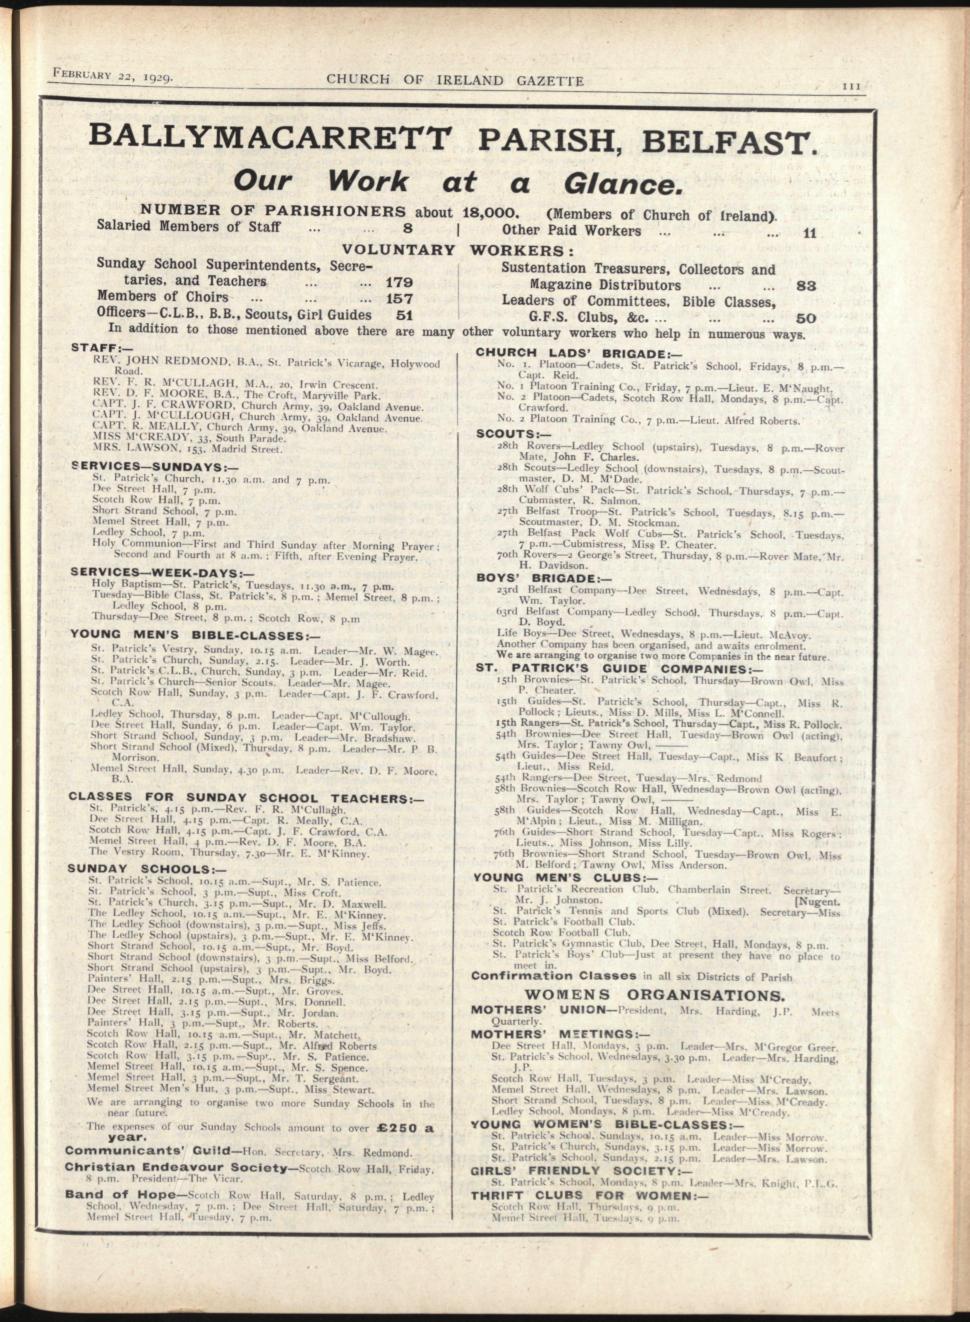 Full page coverage of the work of the parish, Church of Ireland Gazette 22 February 1929